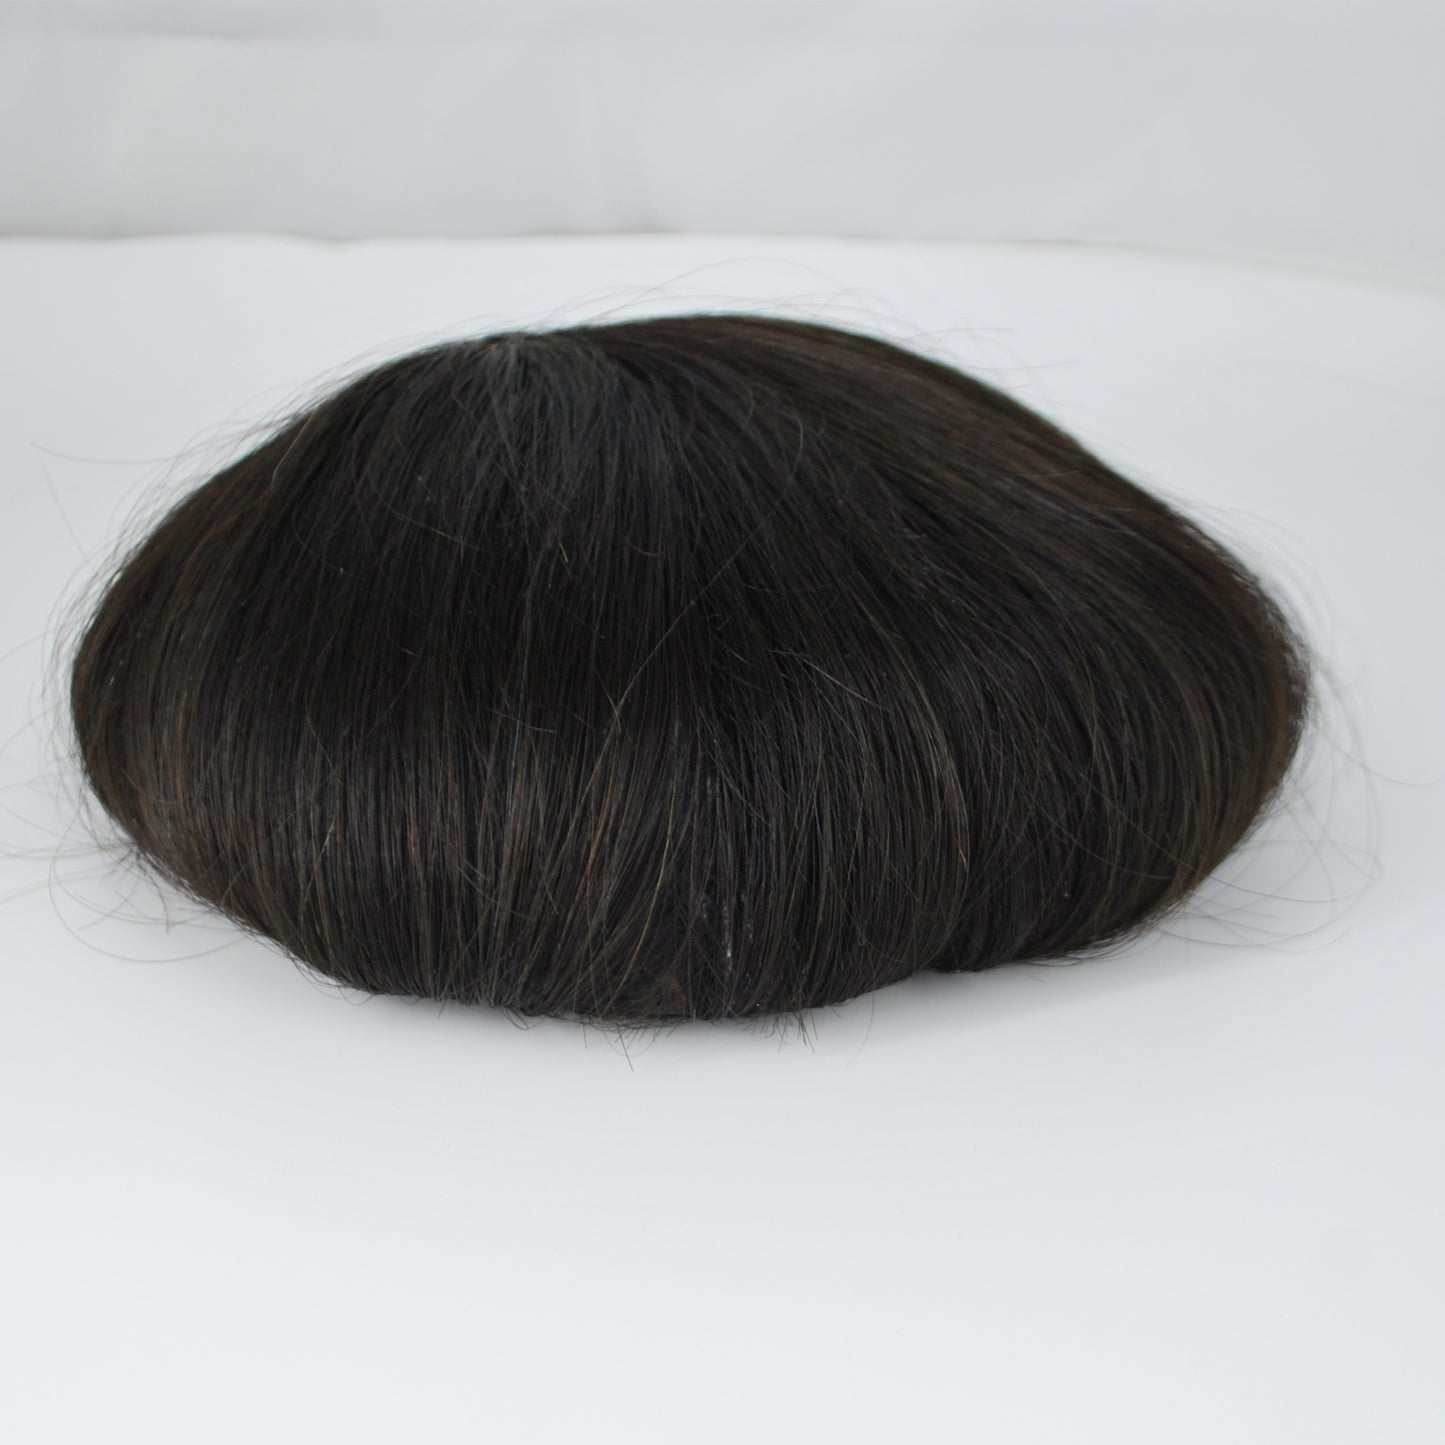 clearance toupee 10 inches long hair system all french lace natural black hair system